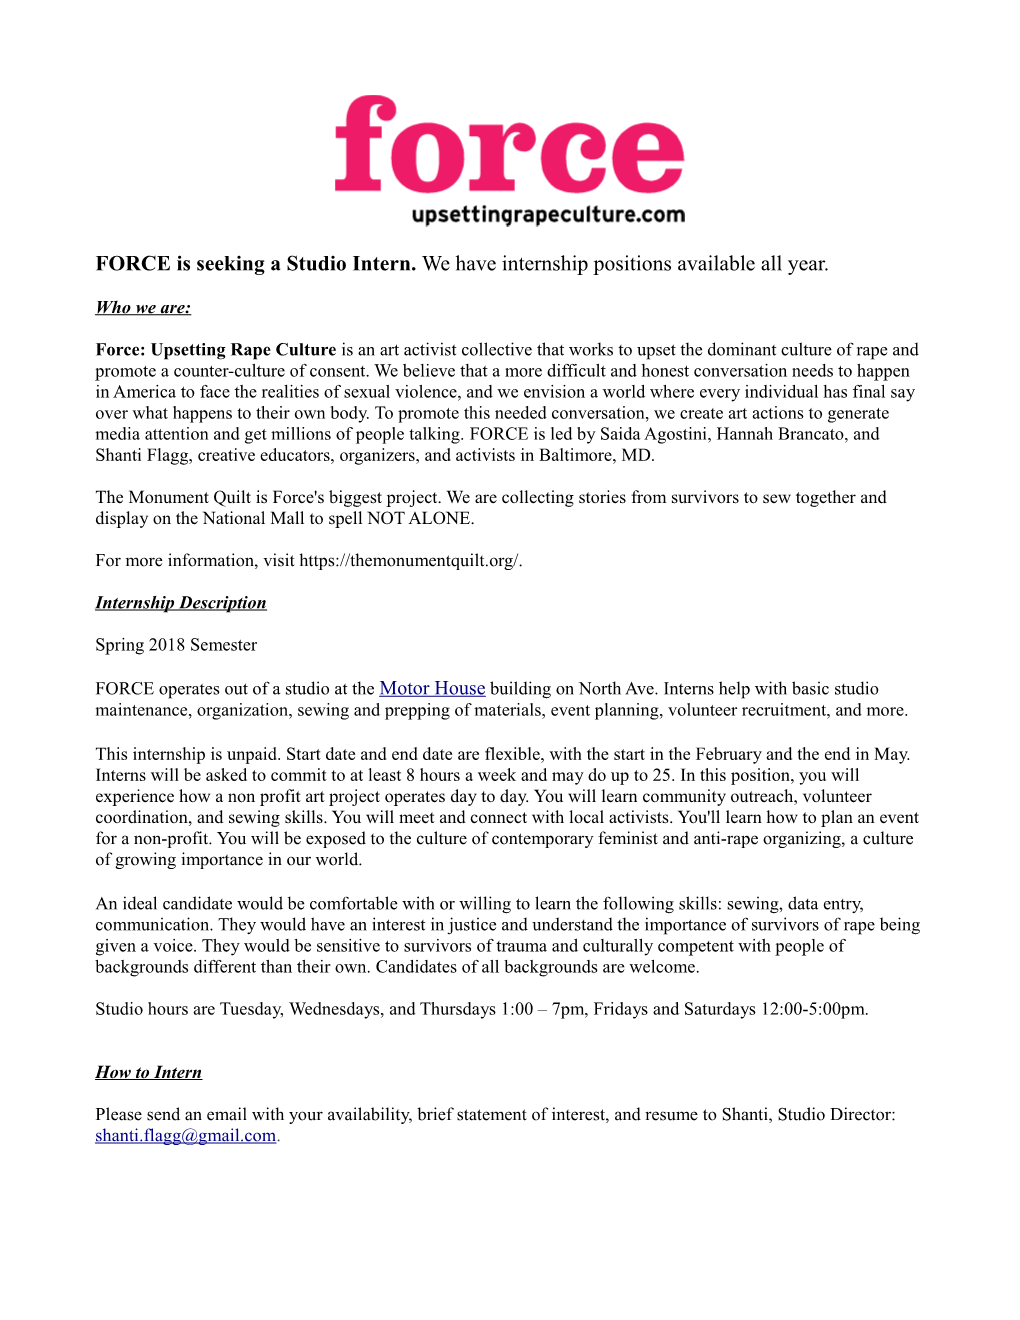 FORCE Is Seeking a Studio Intern. We Have Internship Positions Available All Year